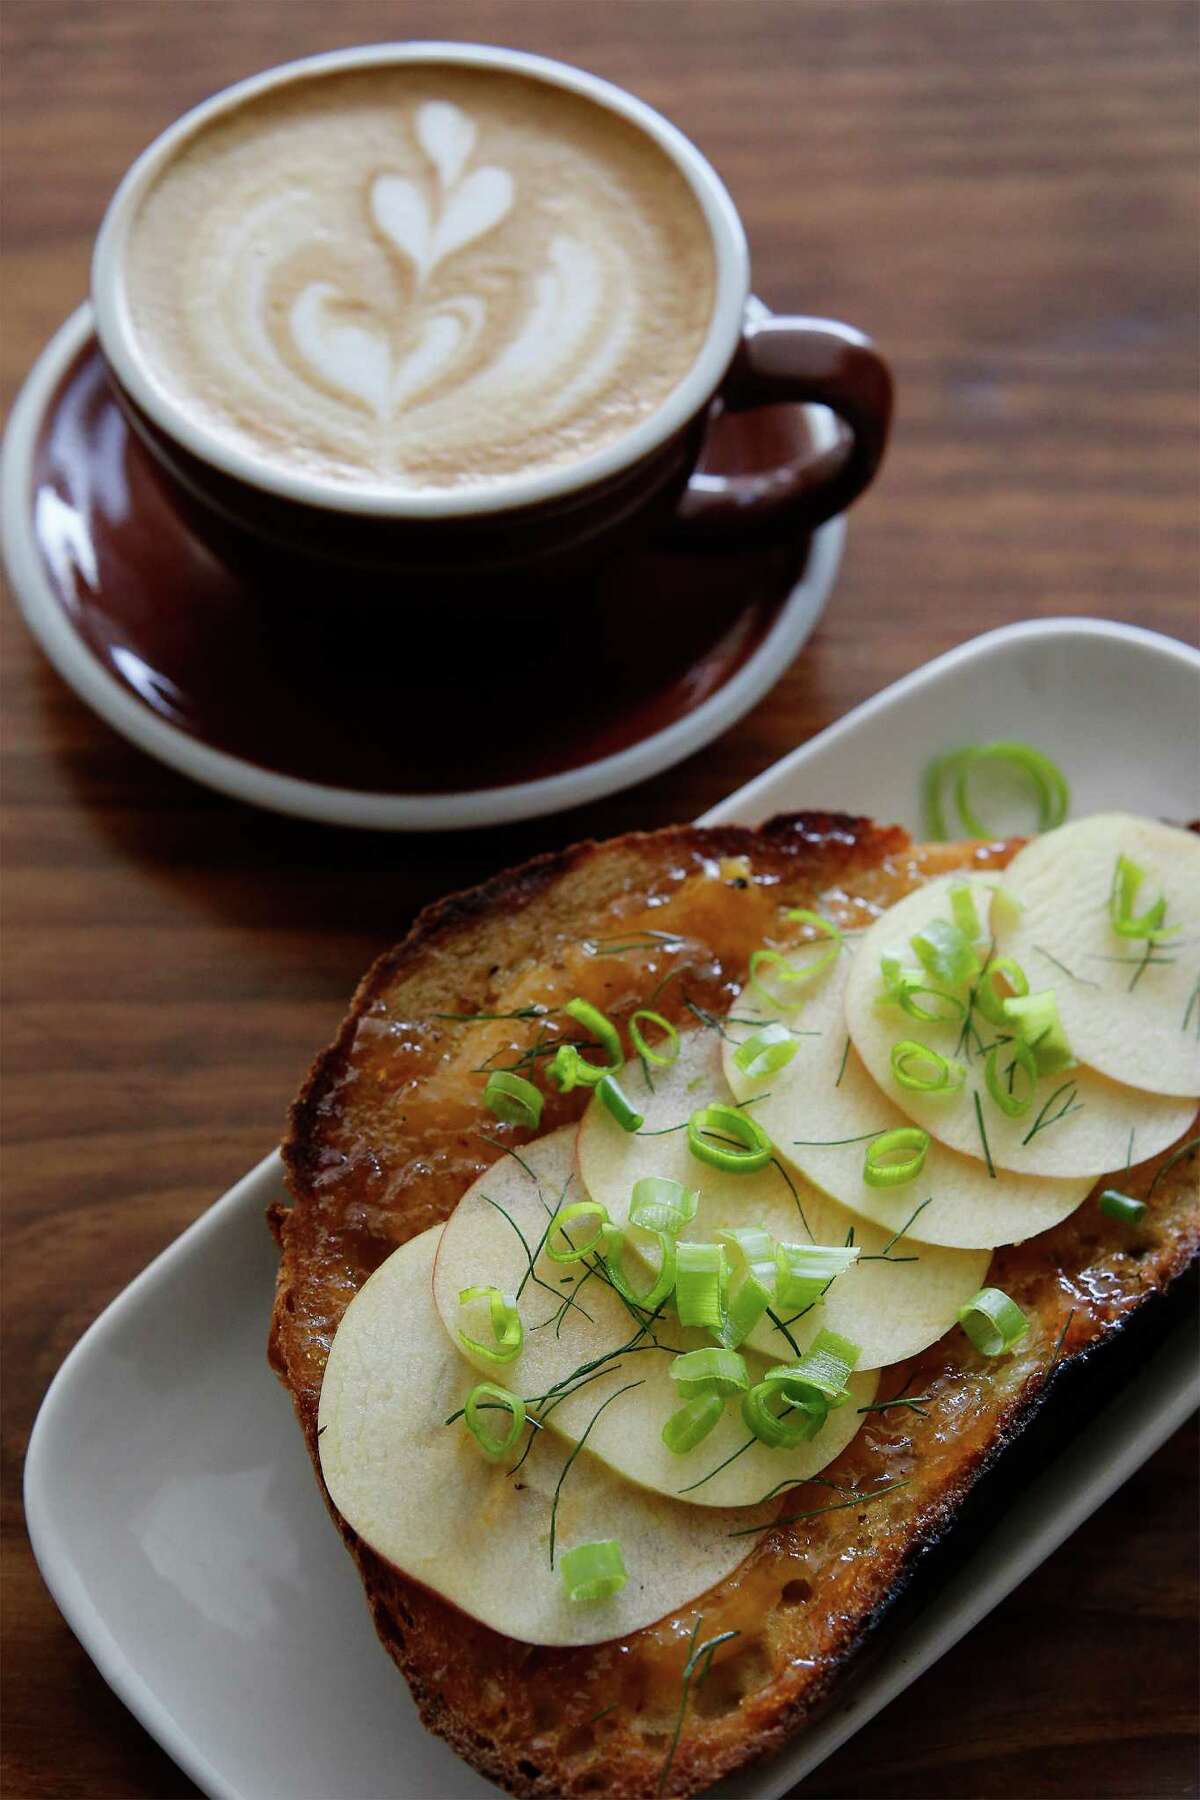 The Fairview Coffee Bar and Grub offers customers their seasonal house-baked sourdough bread toasted and prepared with sharp cheddar, Hot Apple Pie jam, honey crisp apple slices, fennel and green onion served with alongside a cup of cappuccino.